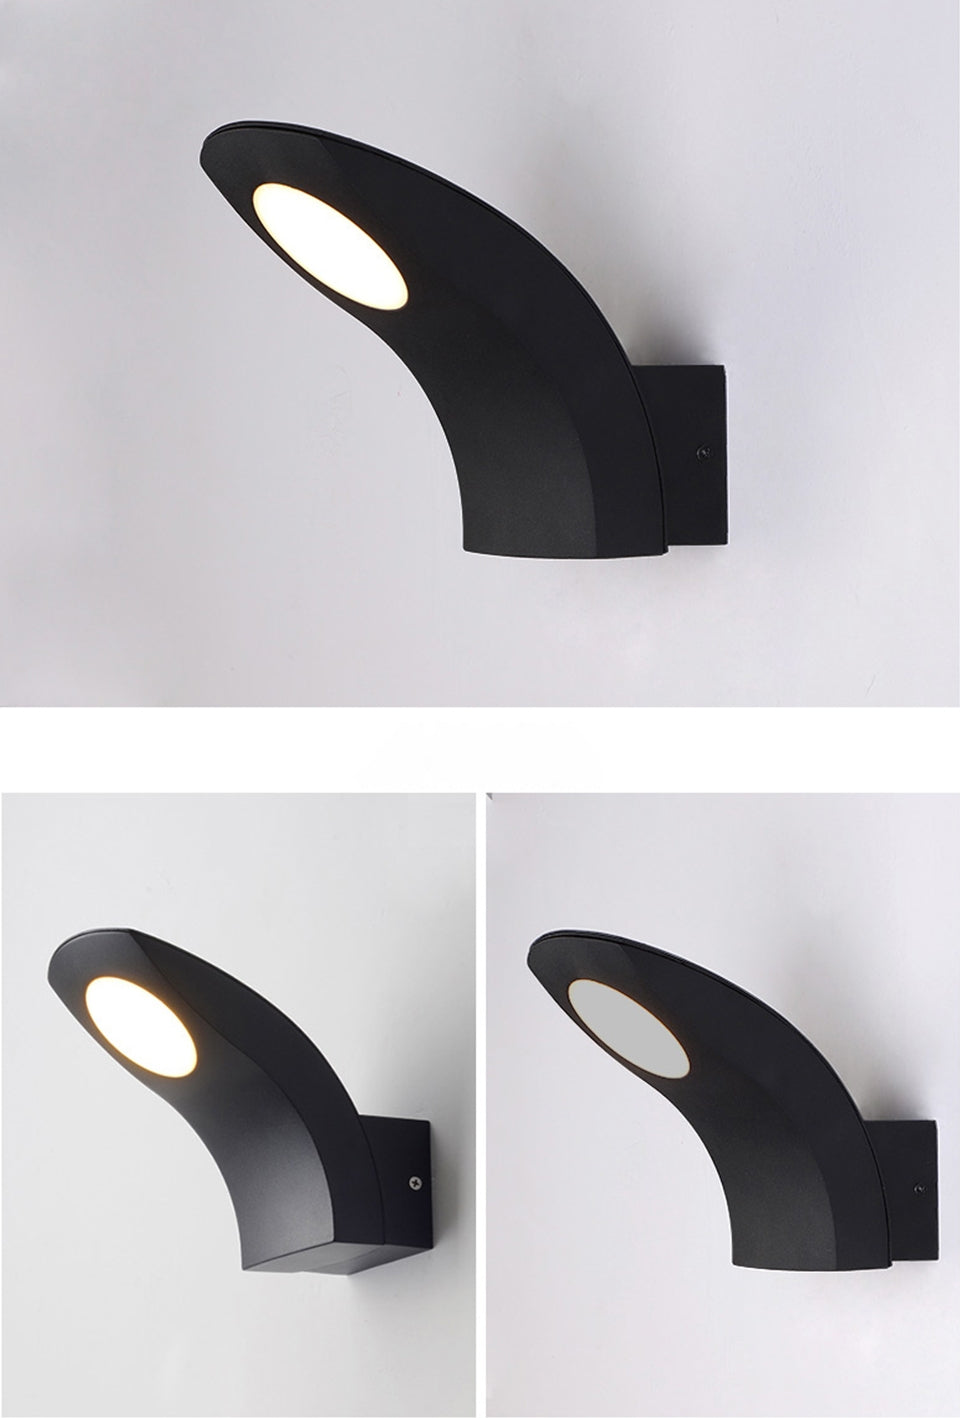 Creative Black Outdoor Waterproof LED Wall Lamp For Balcony, Courtyard, Porch